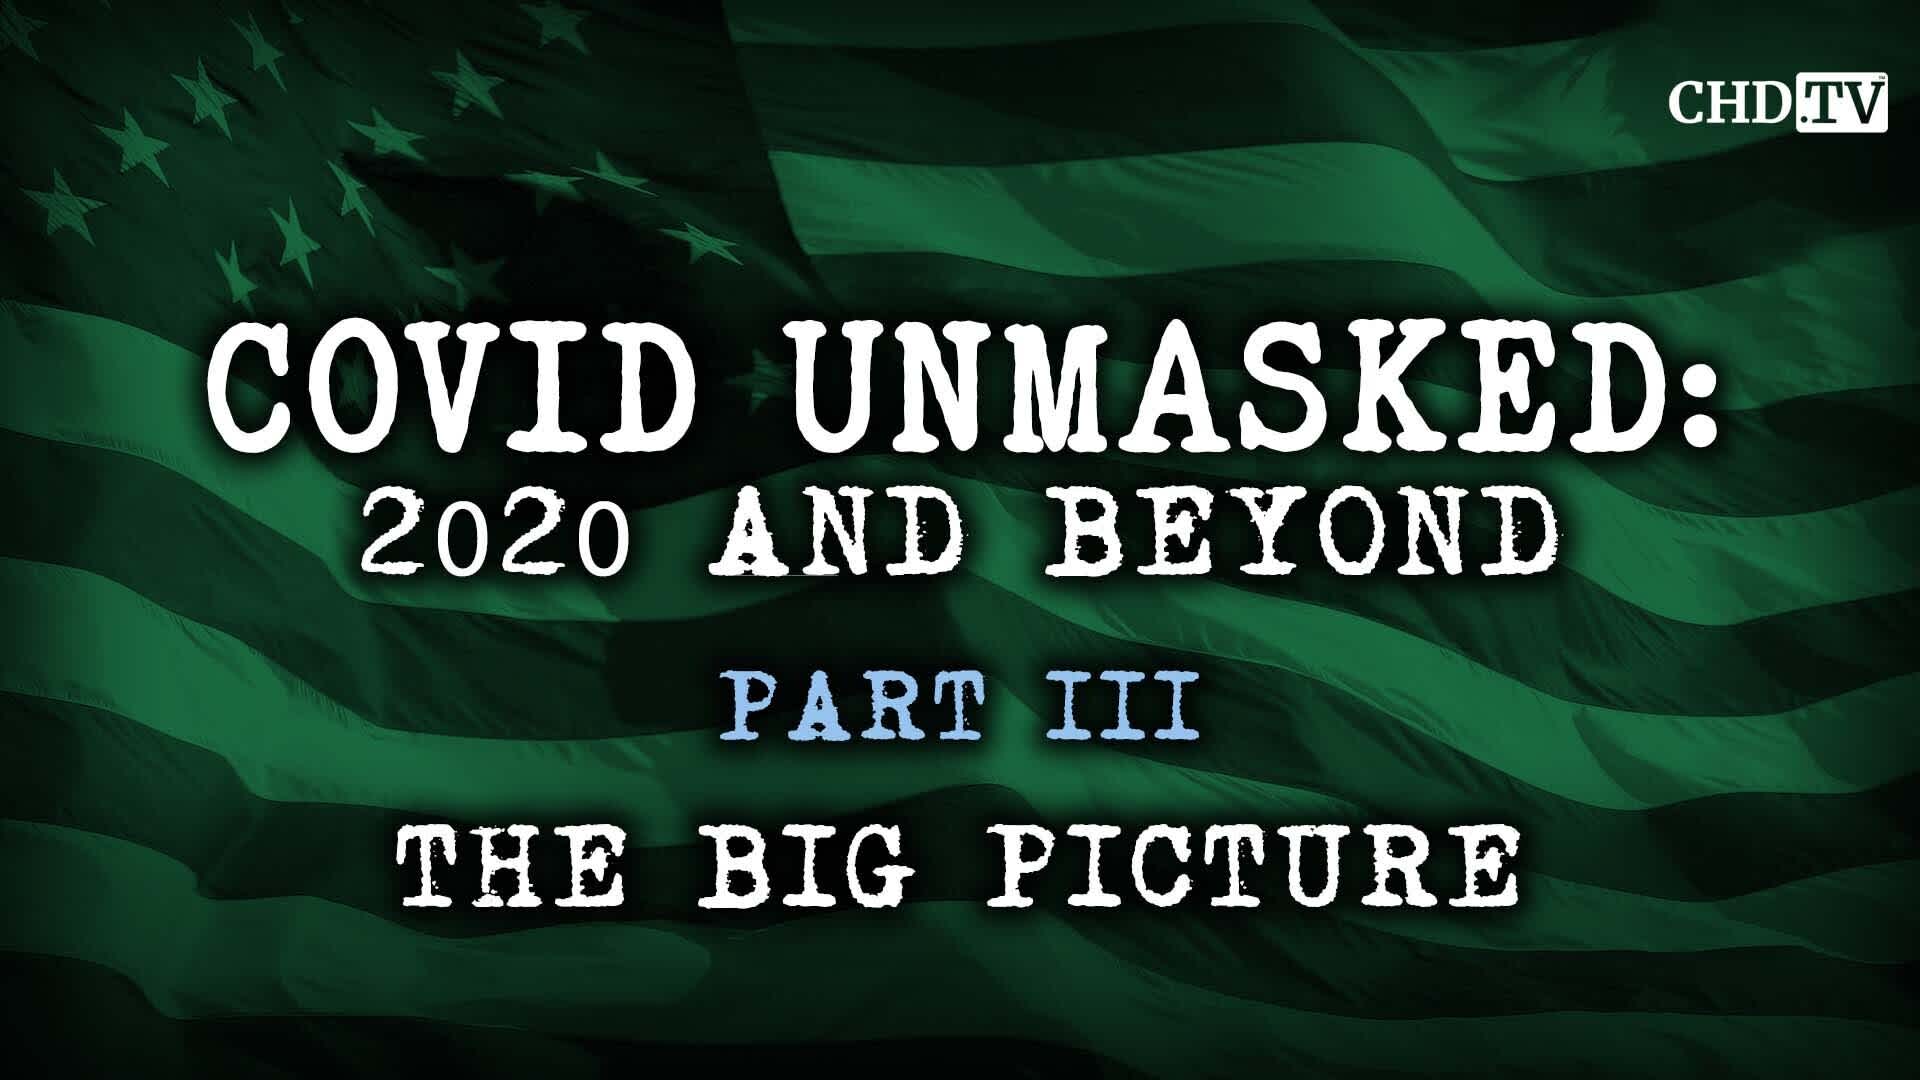 COVID UNMASKED PART 3: THE BIG PICTURE